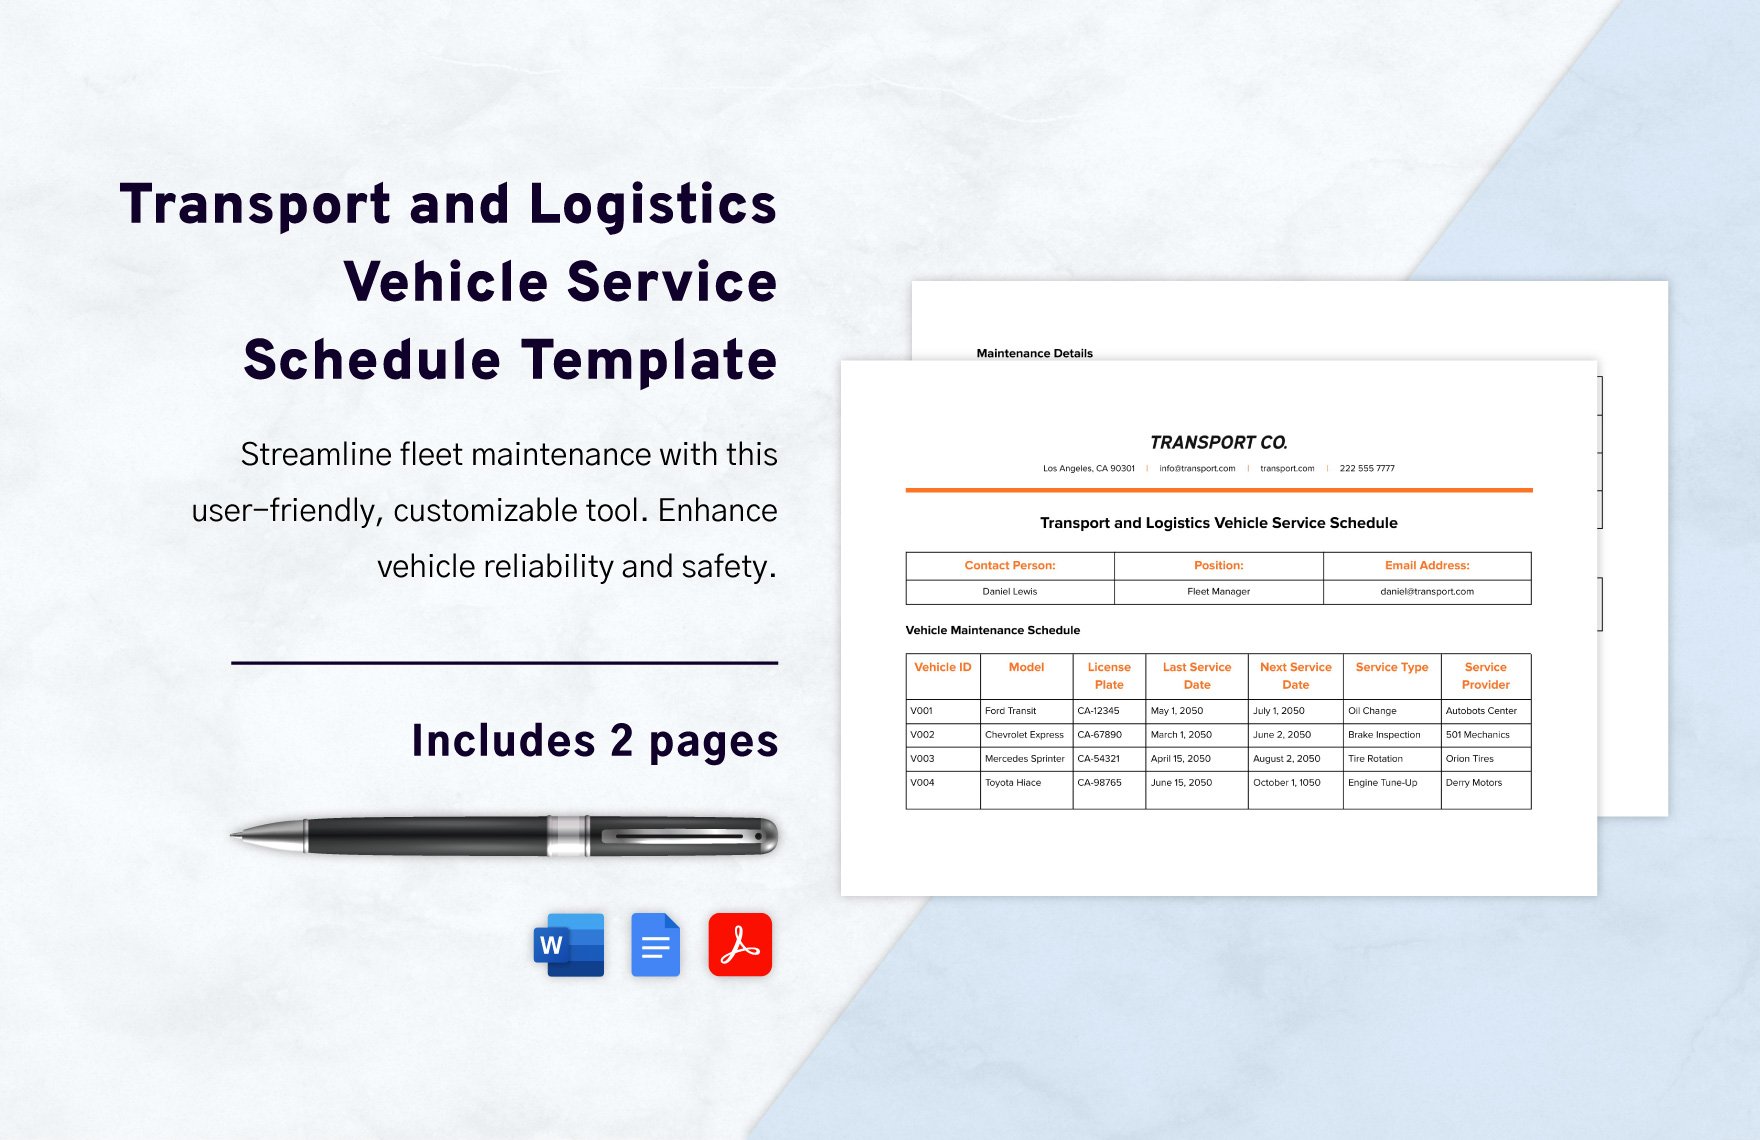 Transport and Logistics Vehicle Service Schedule Template in Word, Google Docs, PDF